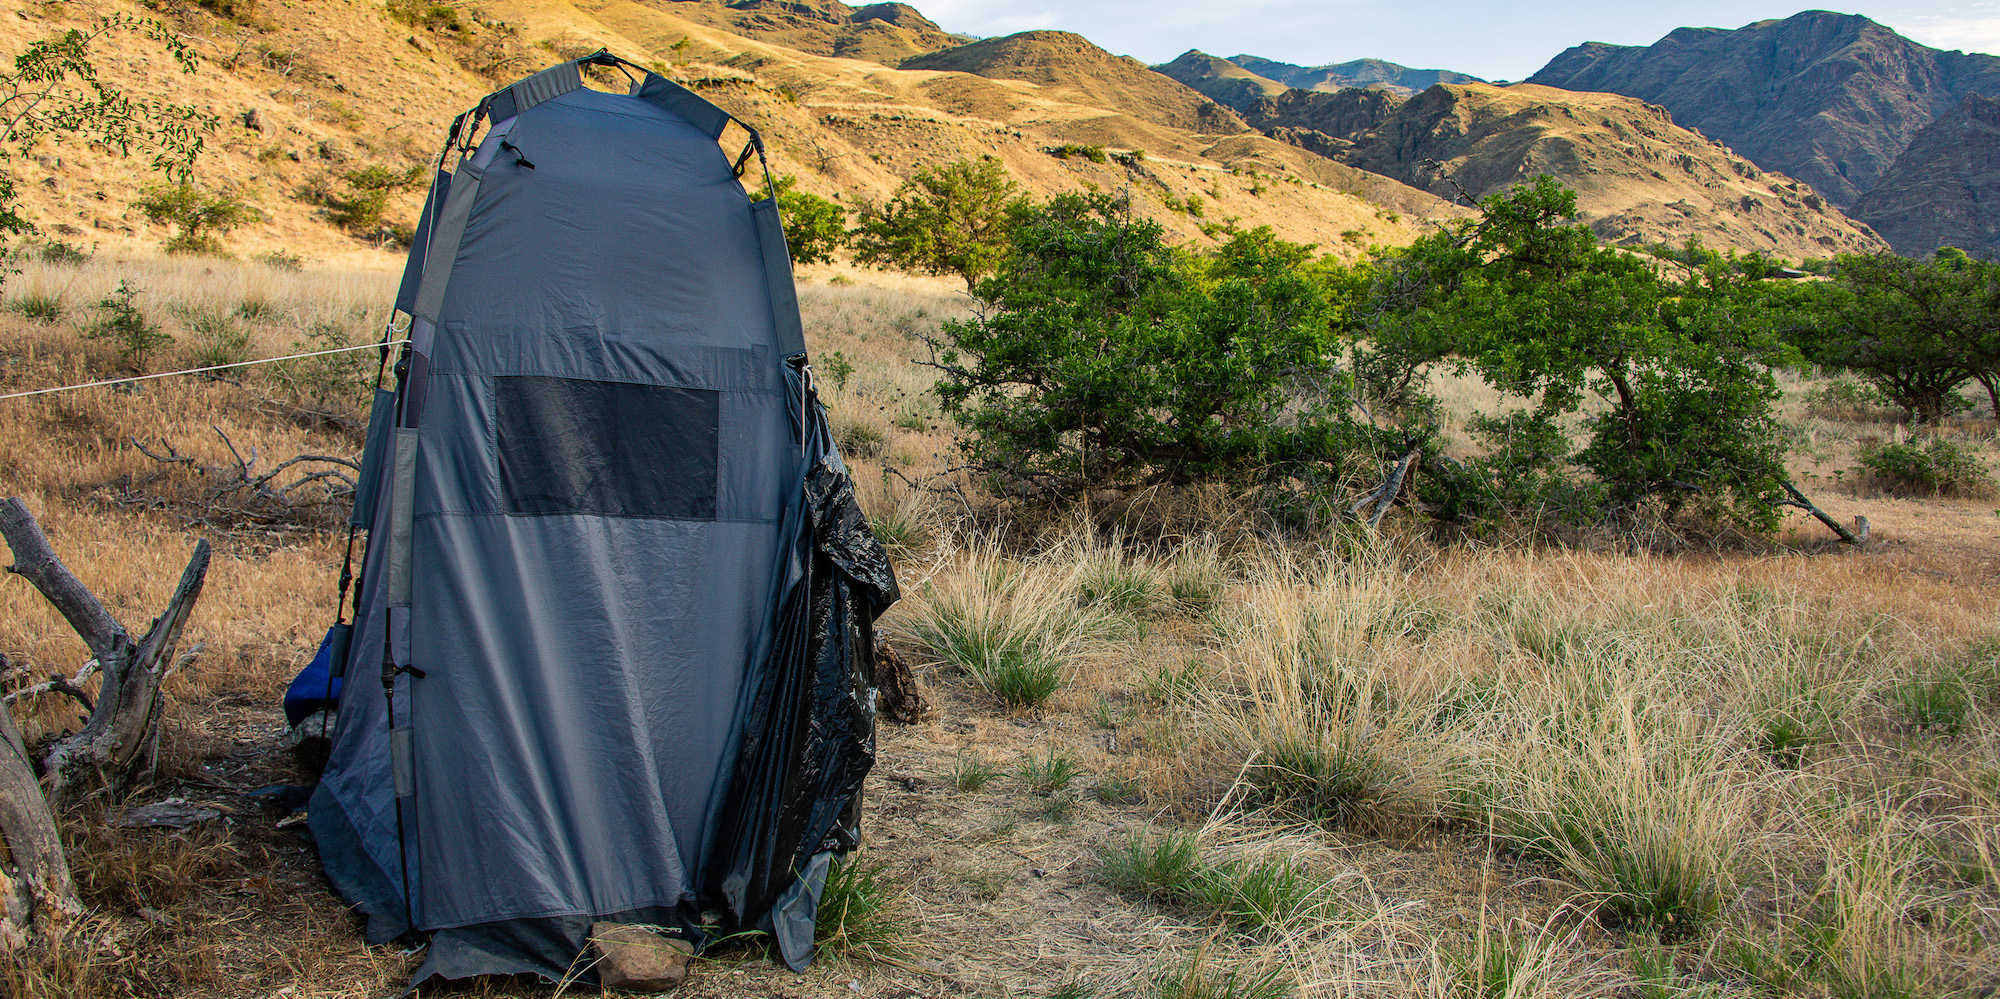 The bathroom tent sent up at camp overlooking the river and Snake River corridor on a ROW Adventures rafting trip